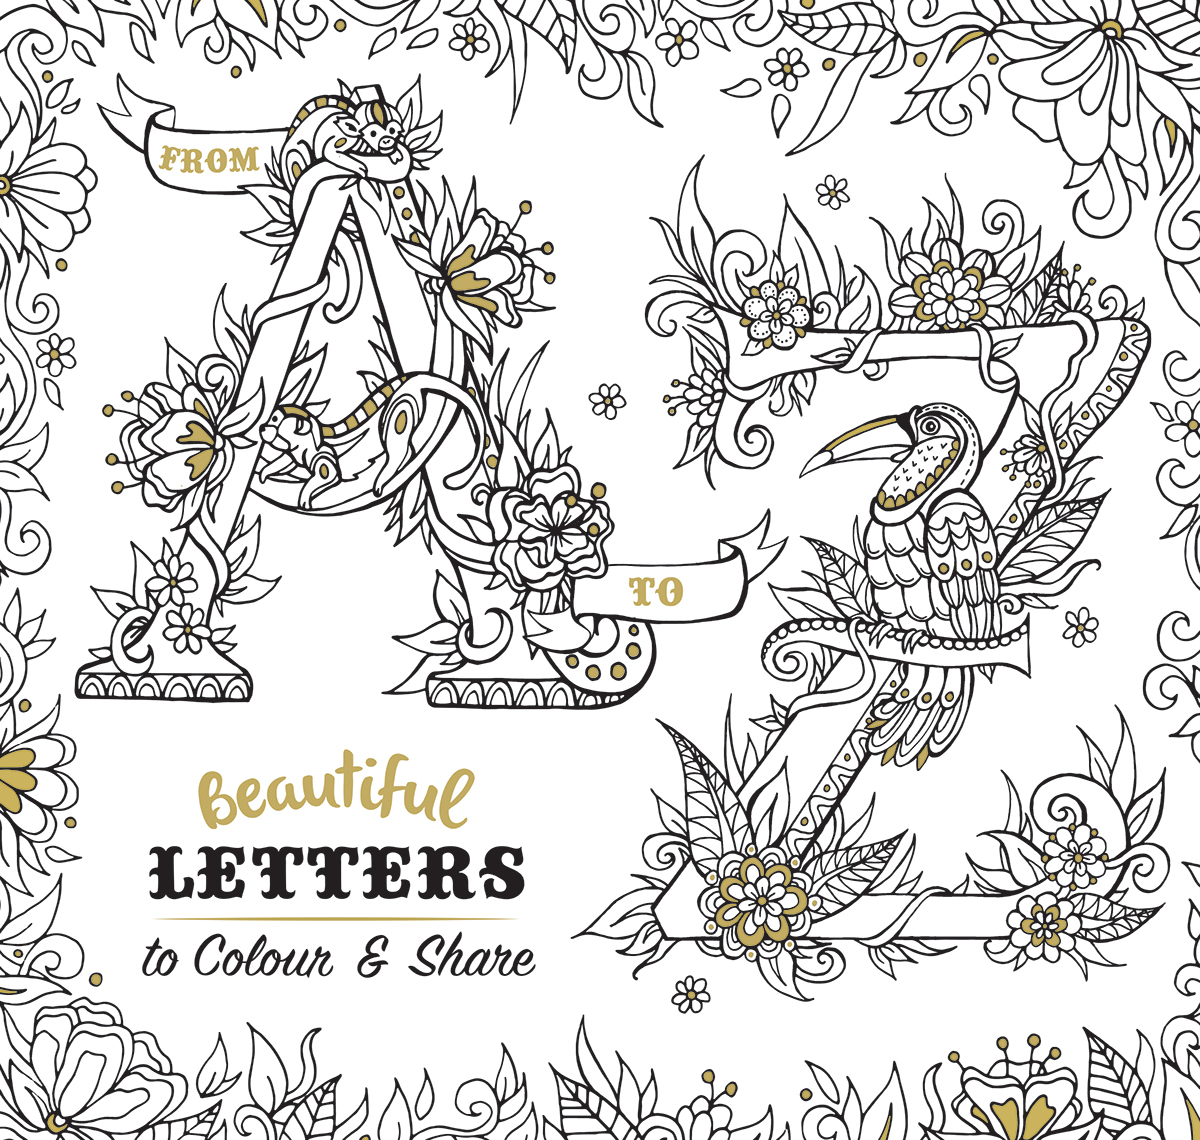 ILLUSTRATION  typography   adult coloring Coloring Books linework decorative Handlettering book cover design